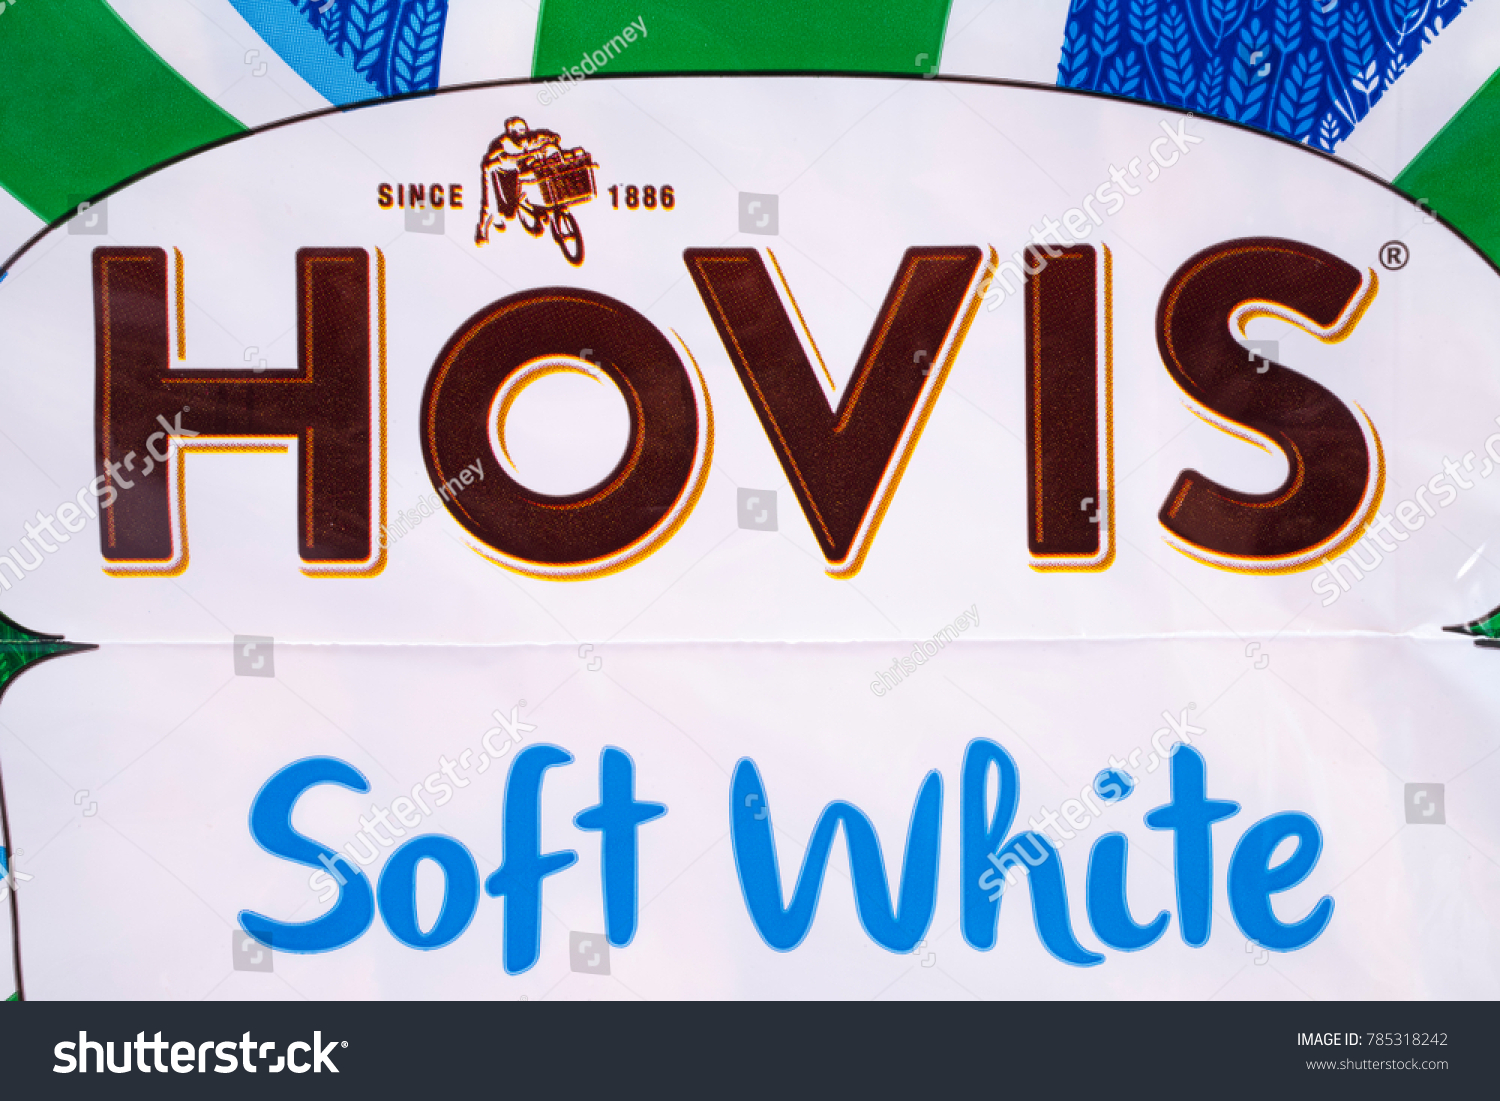 Daily Bread – Strike by Hovis workers could cause hold ups